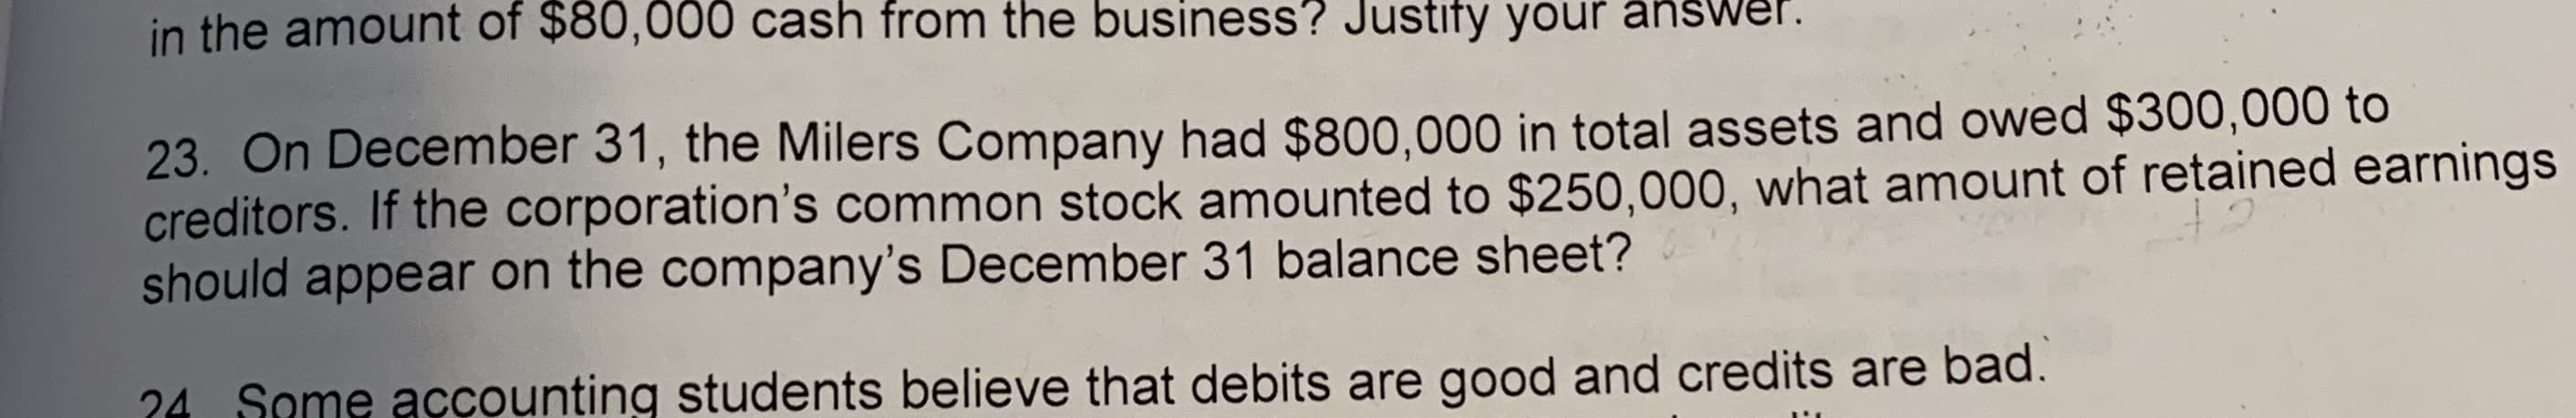 in the amount of $80,000 cash from the business? Justify your answer.
23. On December 31, the Milers Company had $800,000 in total assets and owed $300,000 to
creditors. If the corporation's common stock amounted to $250,000, what amount of retained earnings
should appear on the company's December 31 balance sheet?
24 Some accounting students believe that debits are good and credits are bad.
